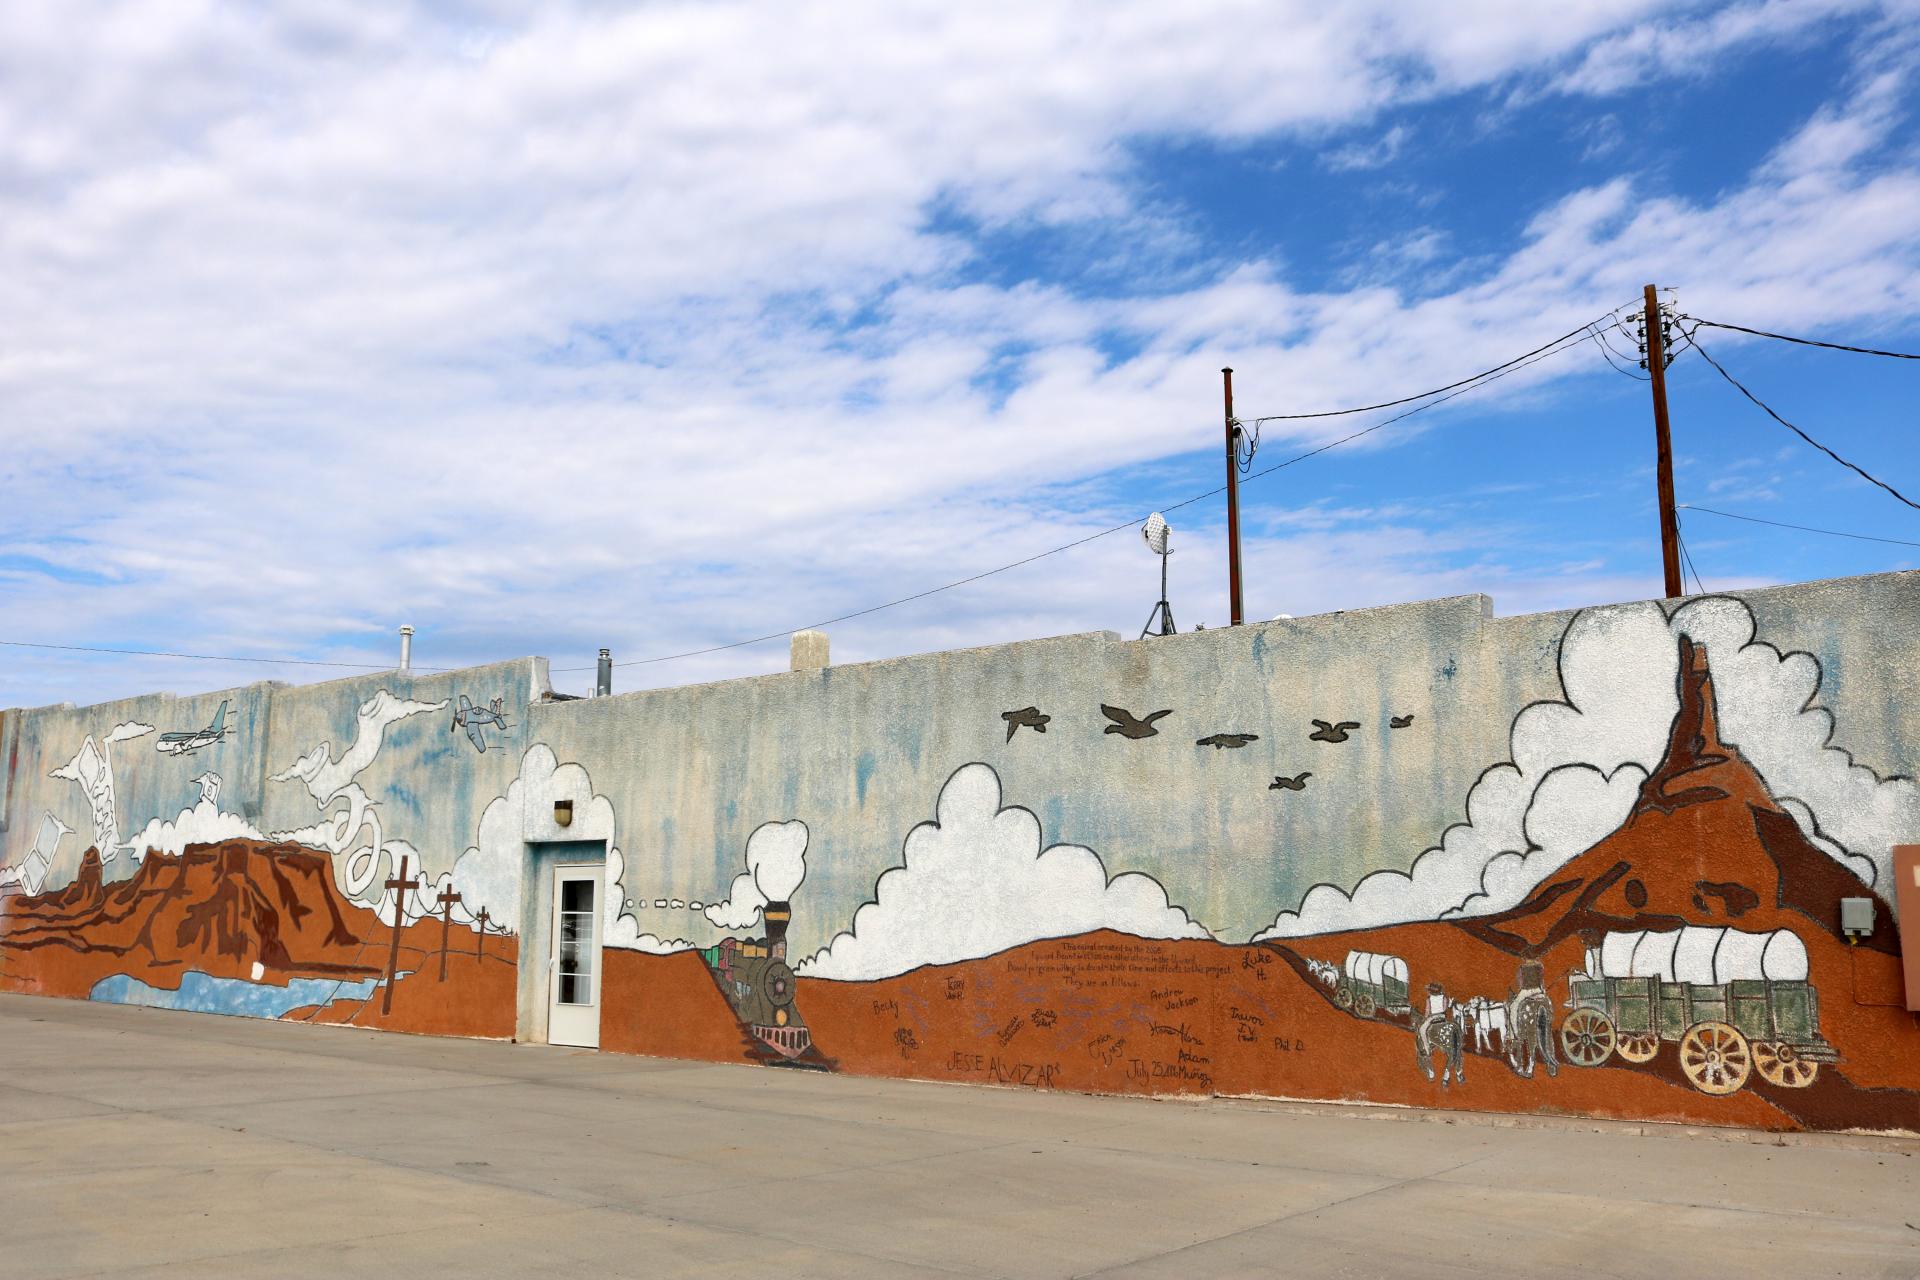 Designed and painted in 2008 by students in Scottsbluff’s Upward Bound program, this mural depicts the evolution of communication and transportation in Scotts Bluff County.